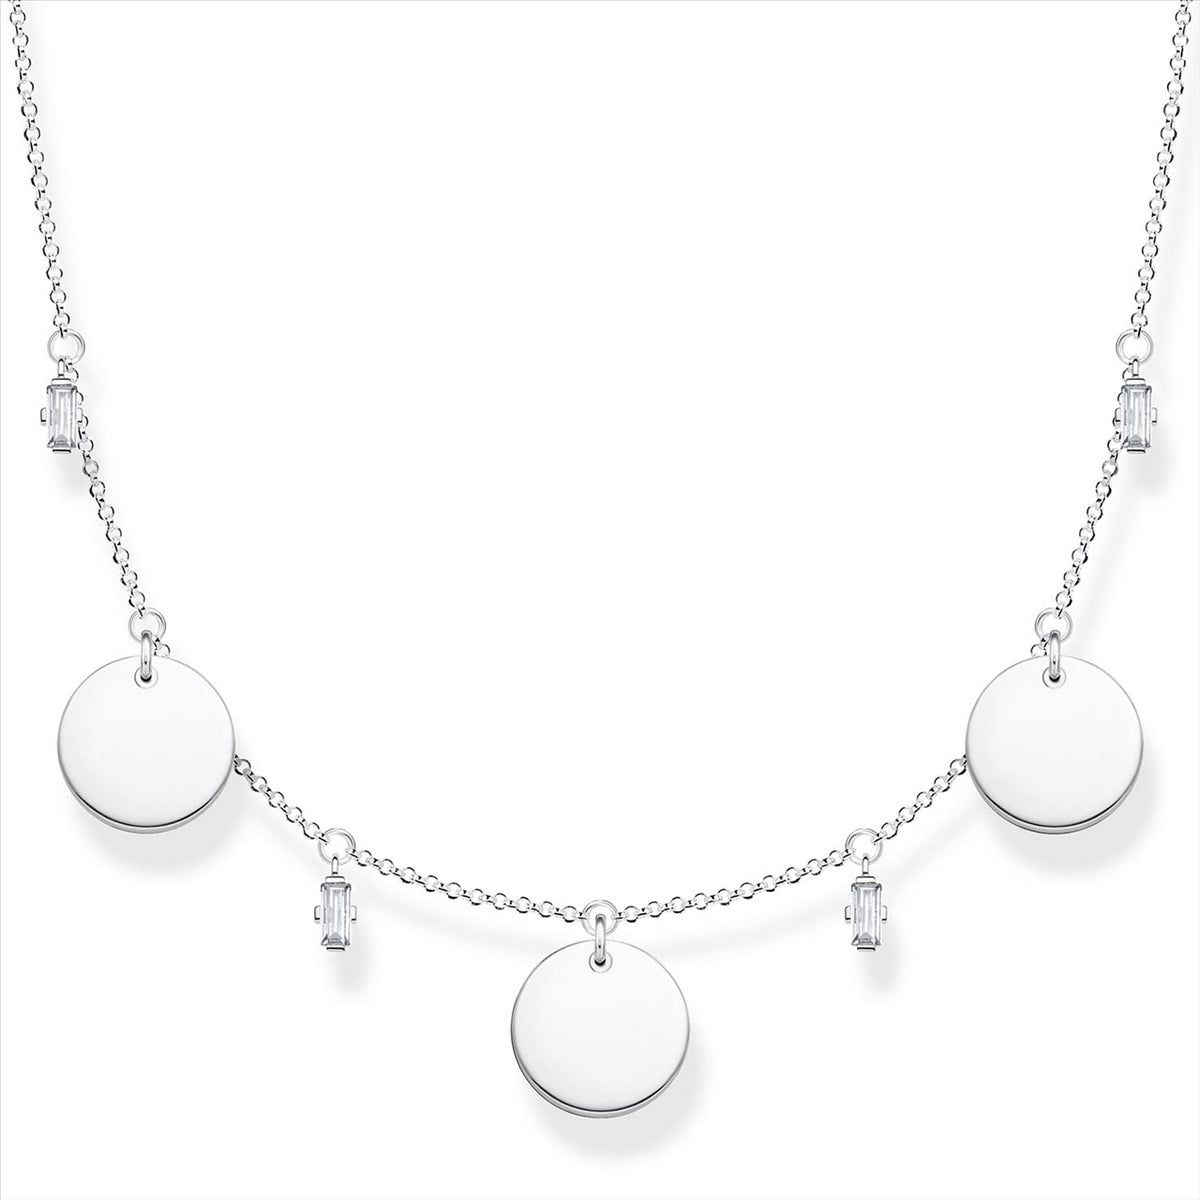 Thomas Sabo Necklace with 3 discs and Cubic Zirconias